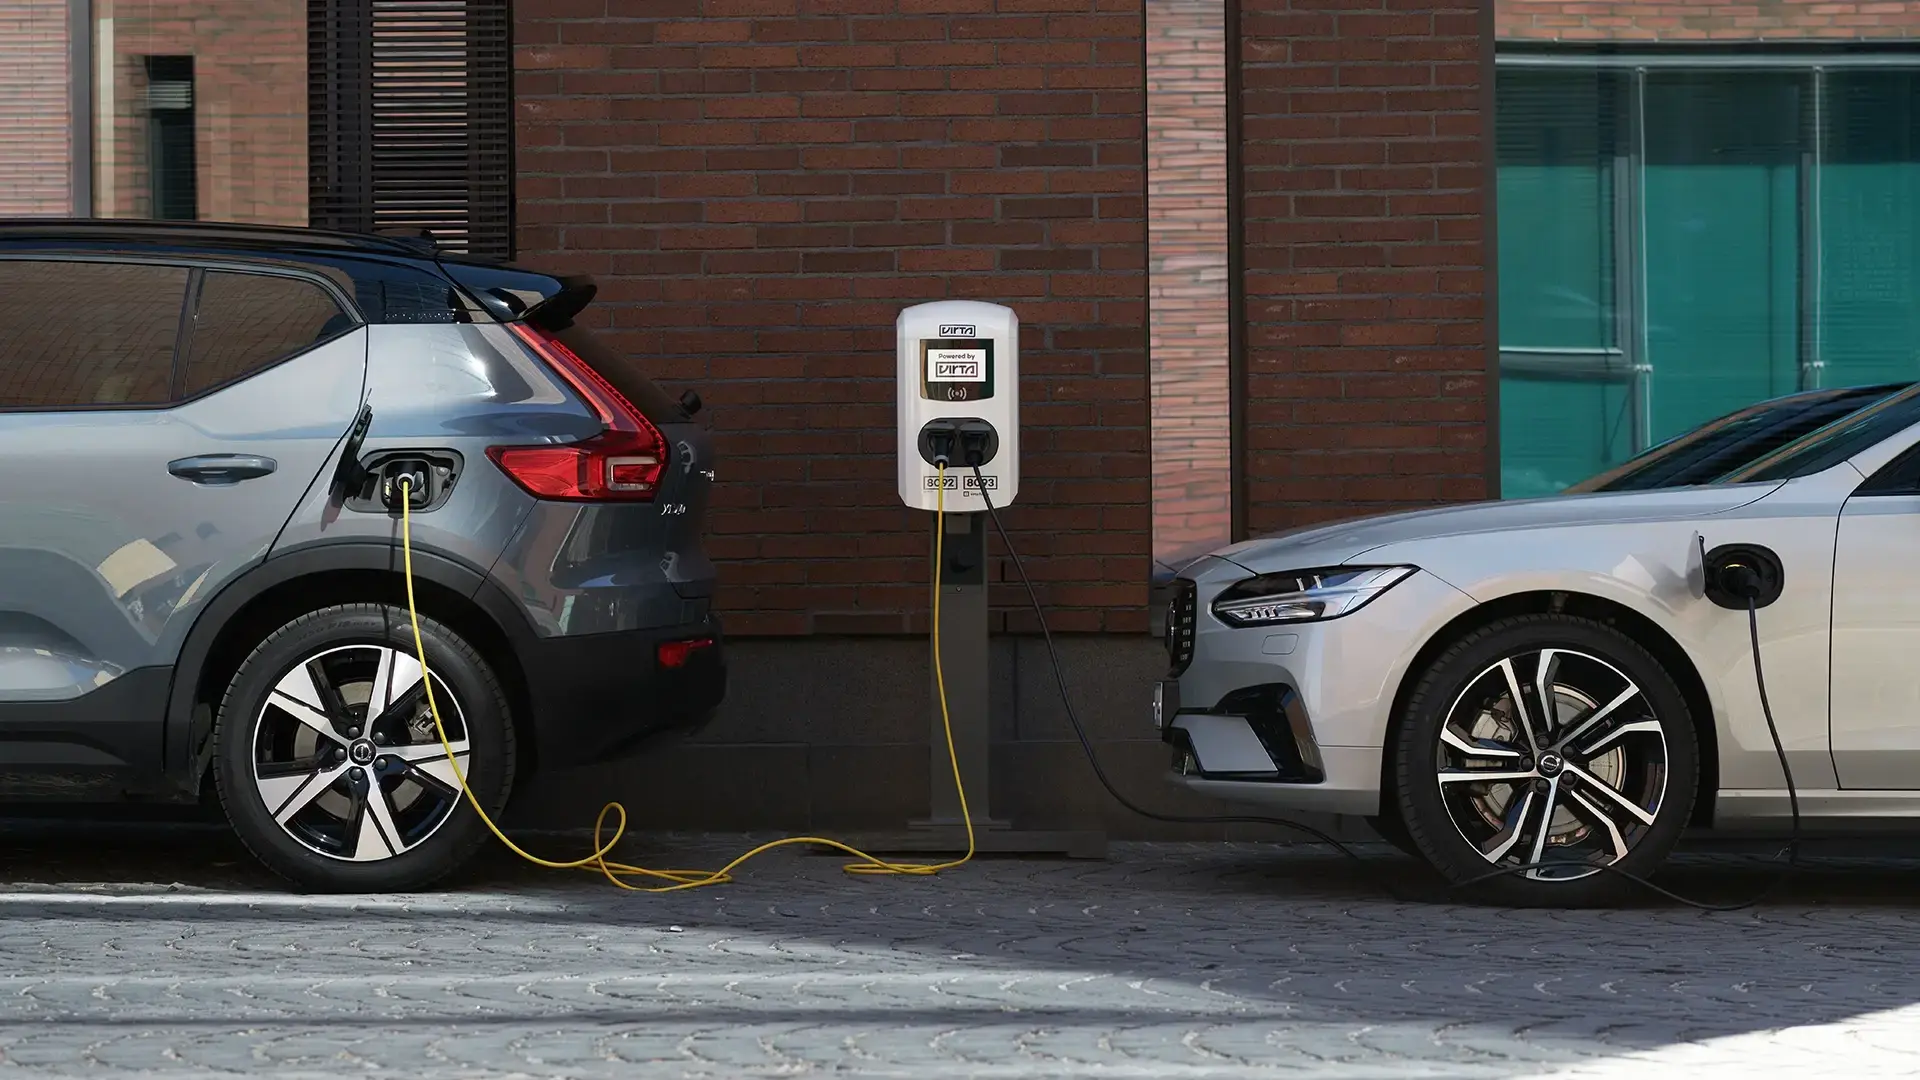 Two electric cars with AC charger in the middle with brick wall in background in city